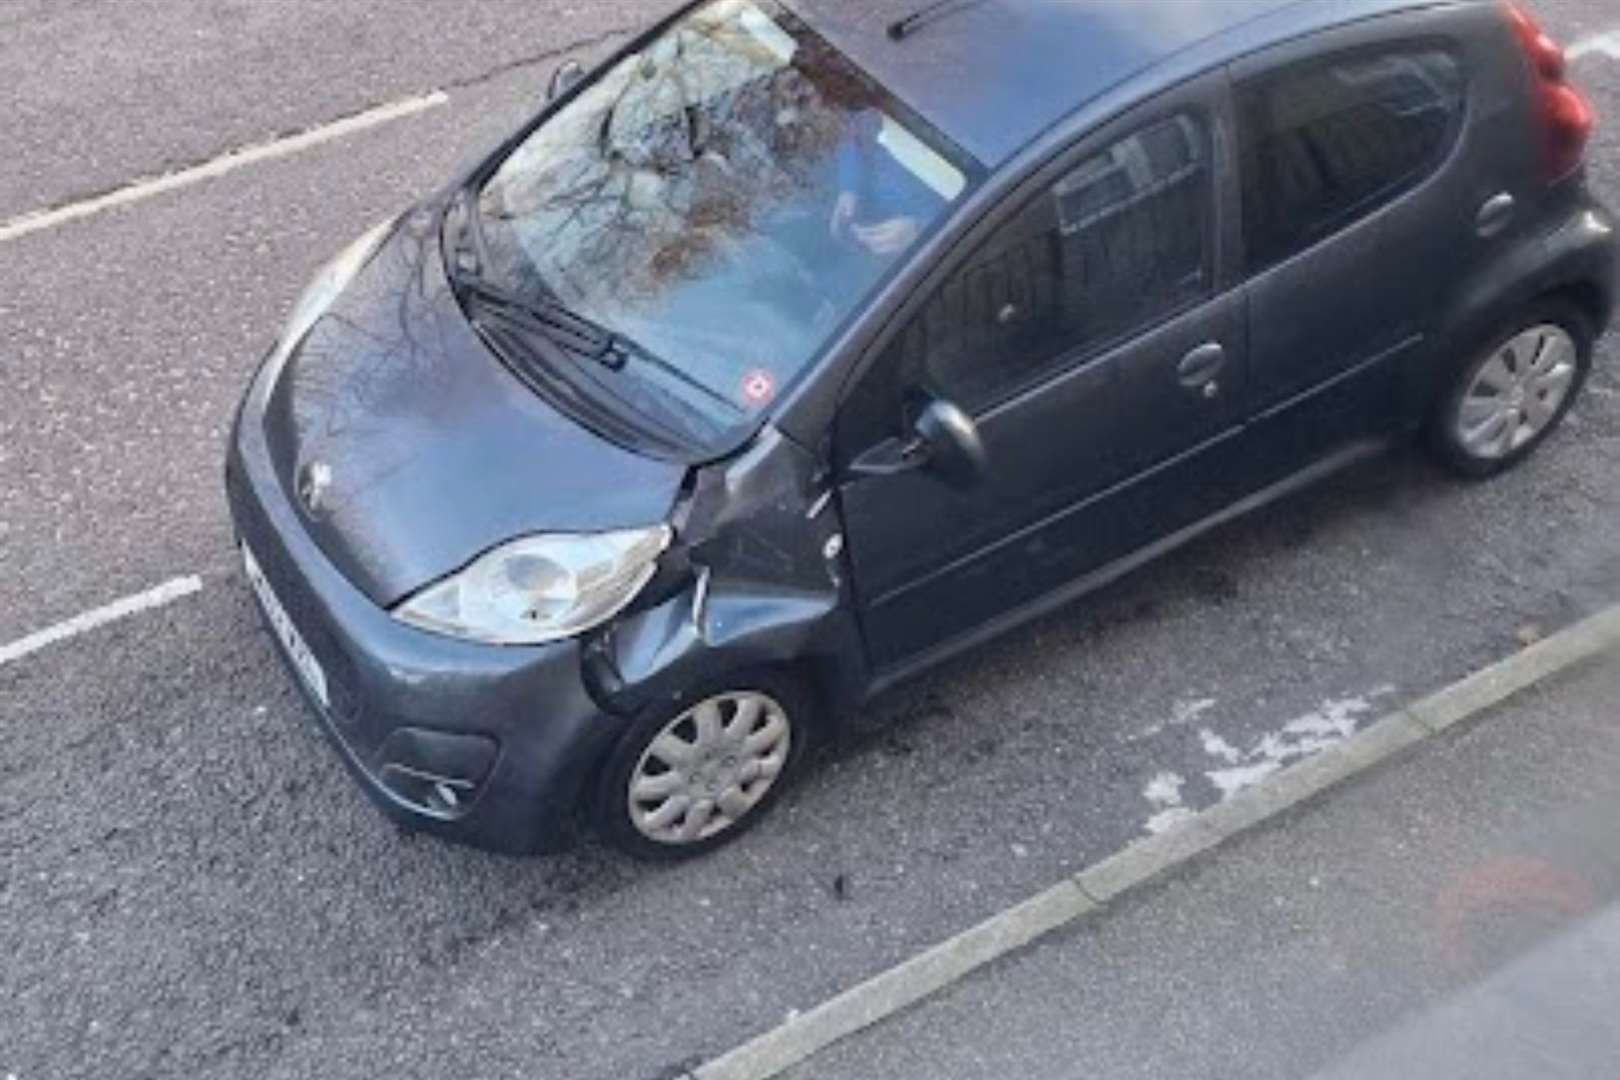 A peugot involved in the crash has been damaged